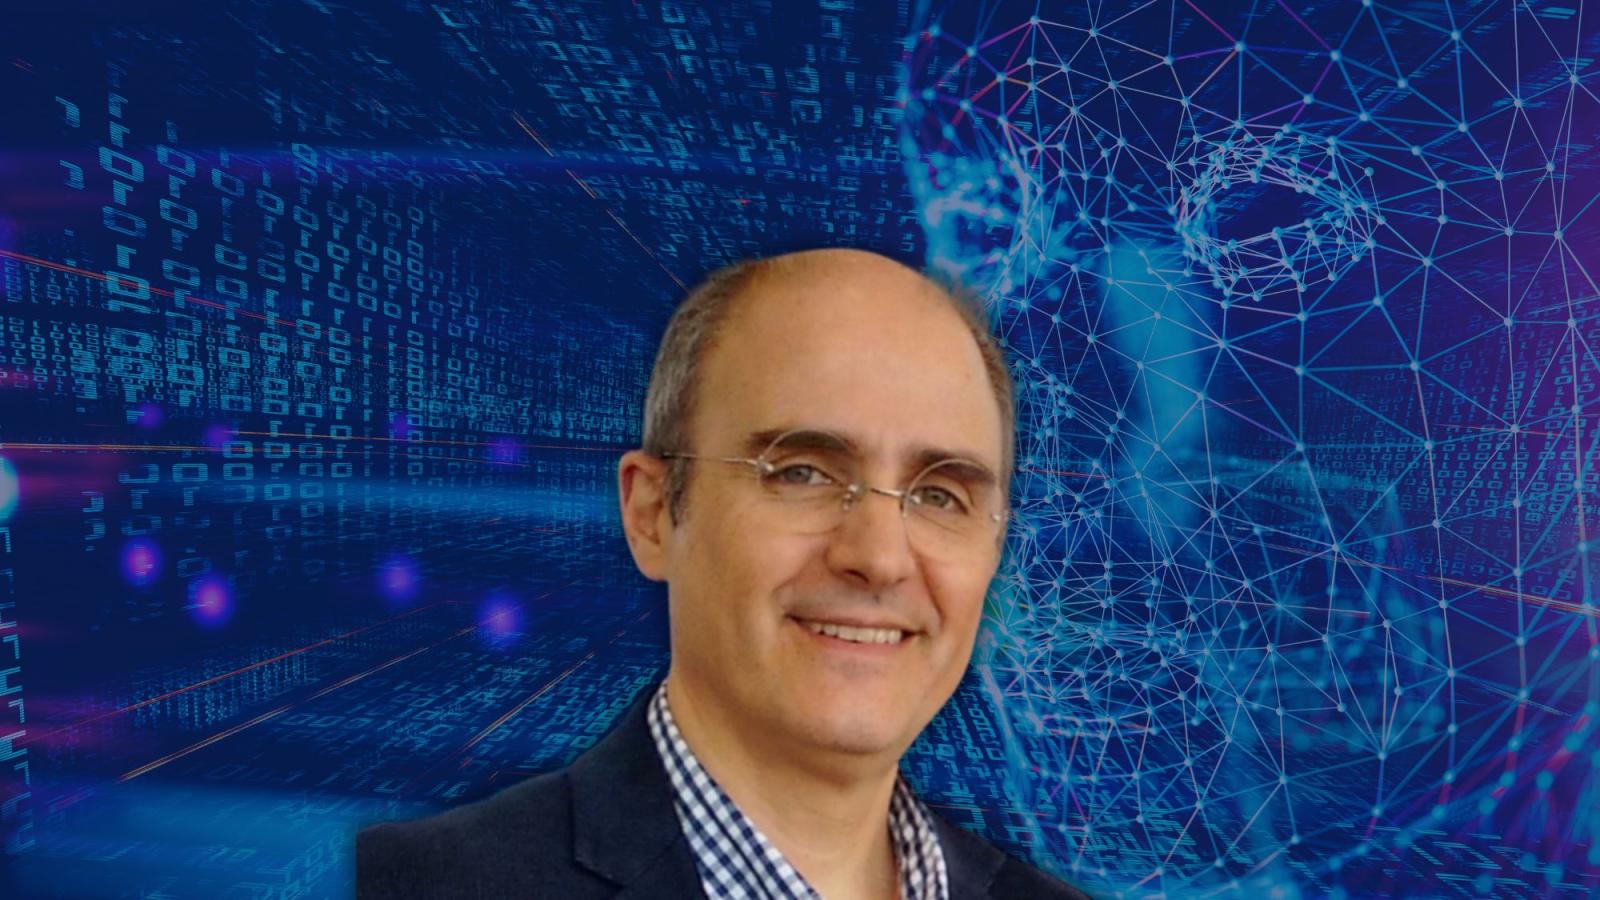 Headshot of Seidenberg professor Dr. Miguel Mosteiro, in front of a digital background.